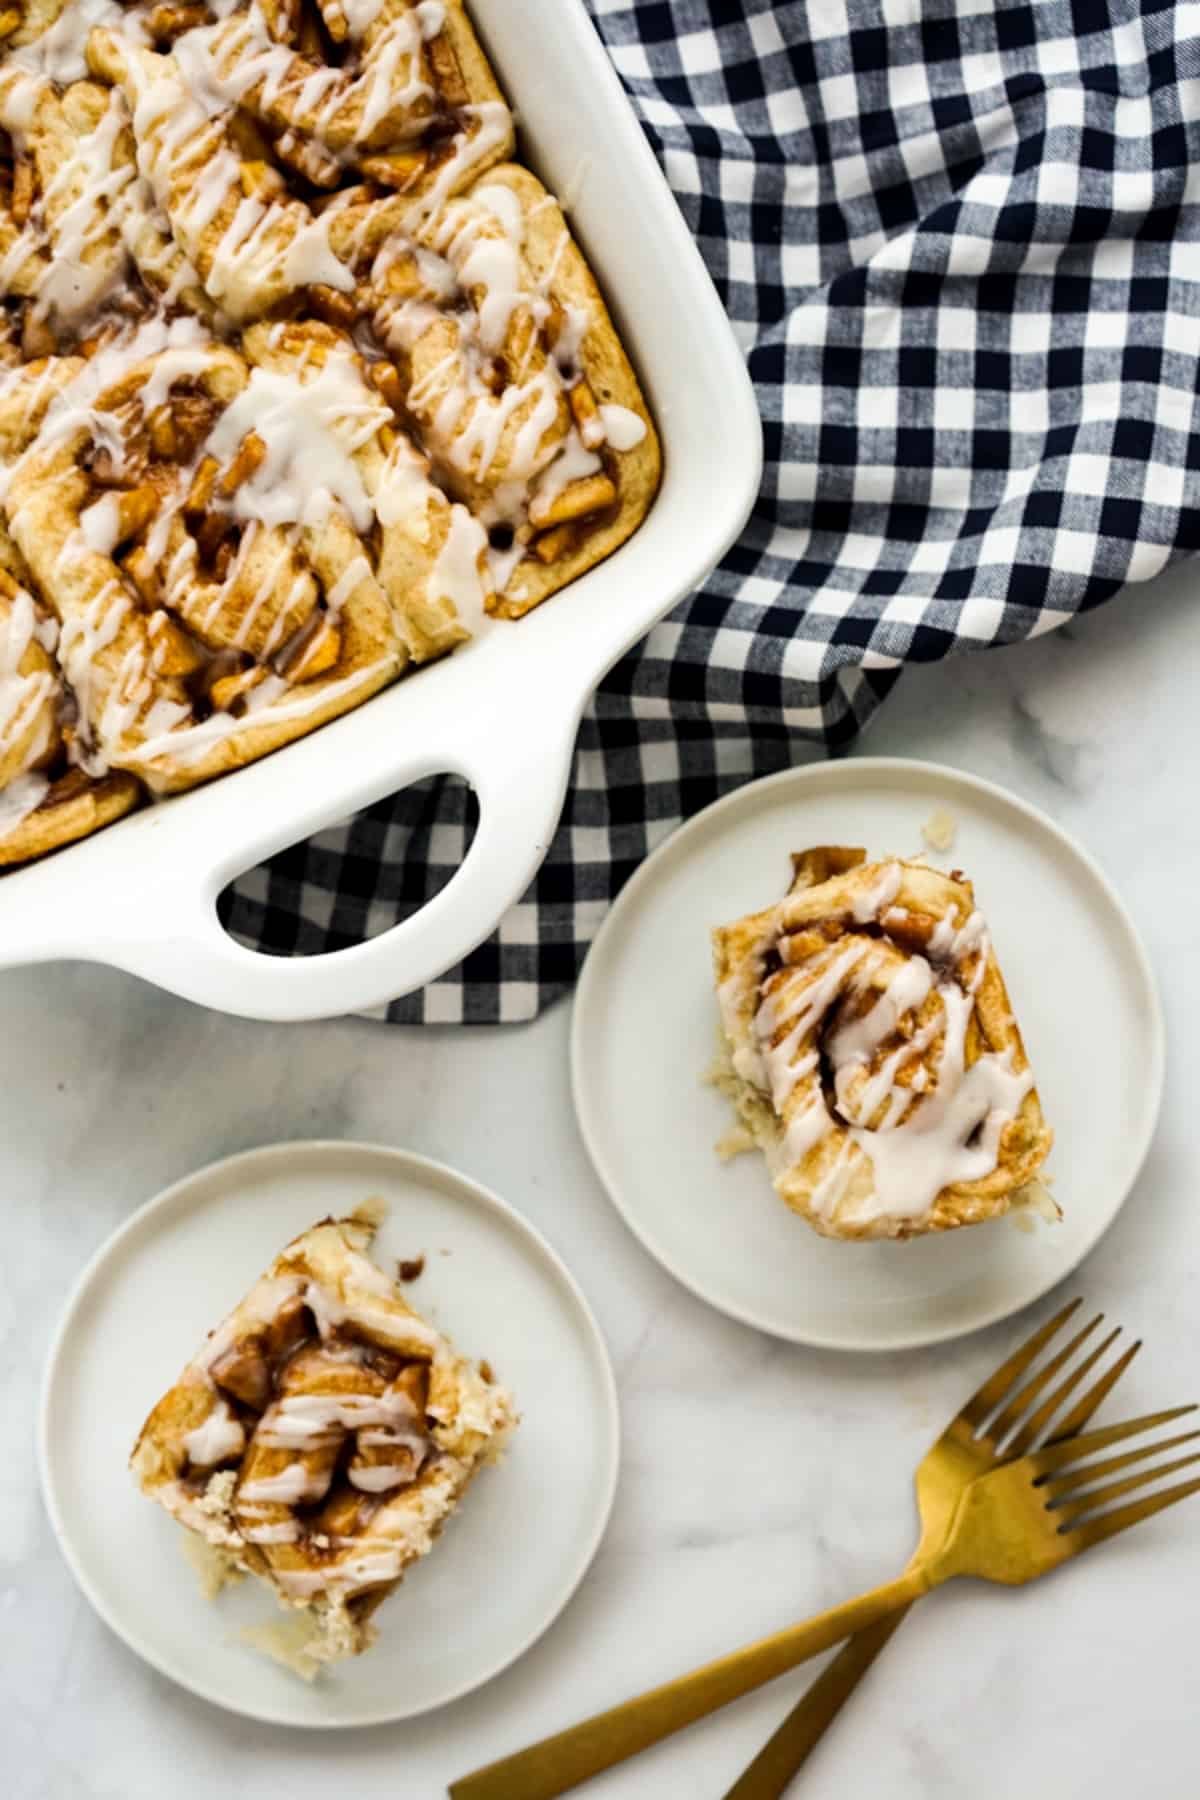 A casserole dish of cinnamon rolls and two plates of cinnamon rolls